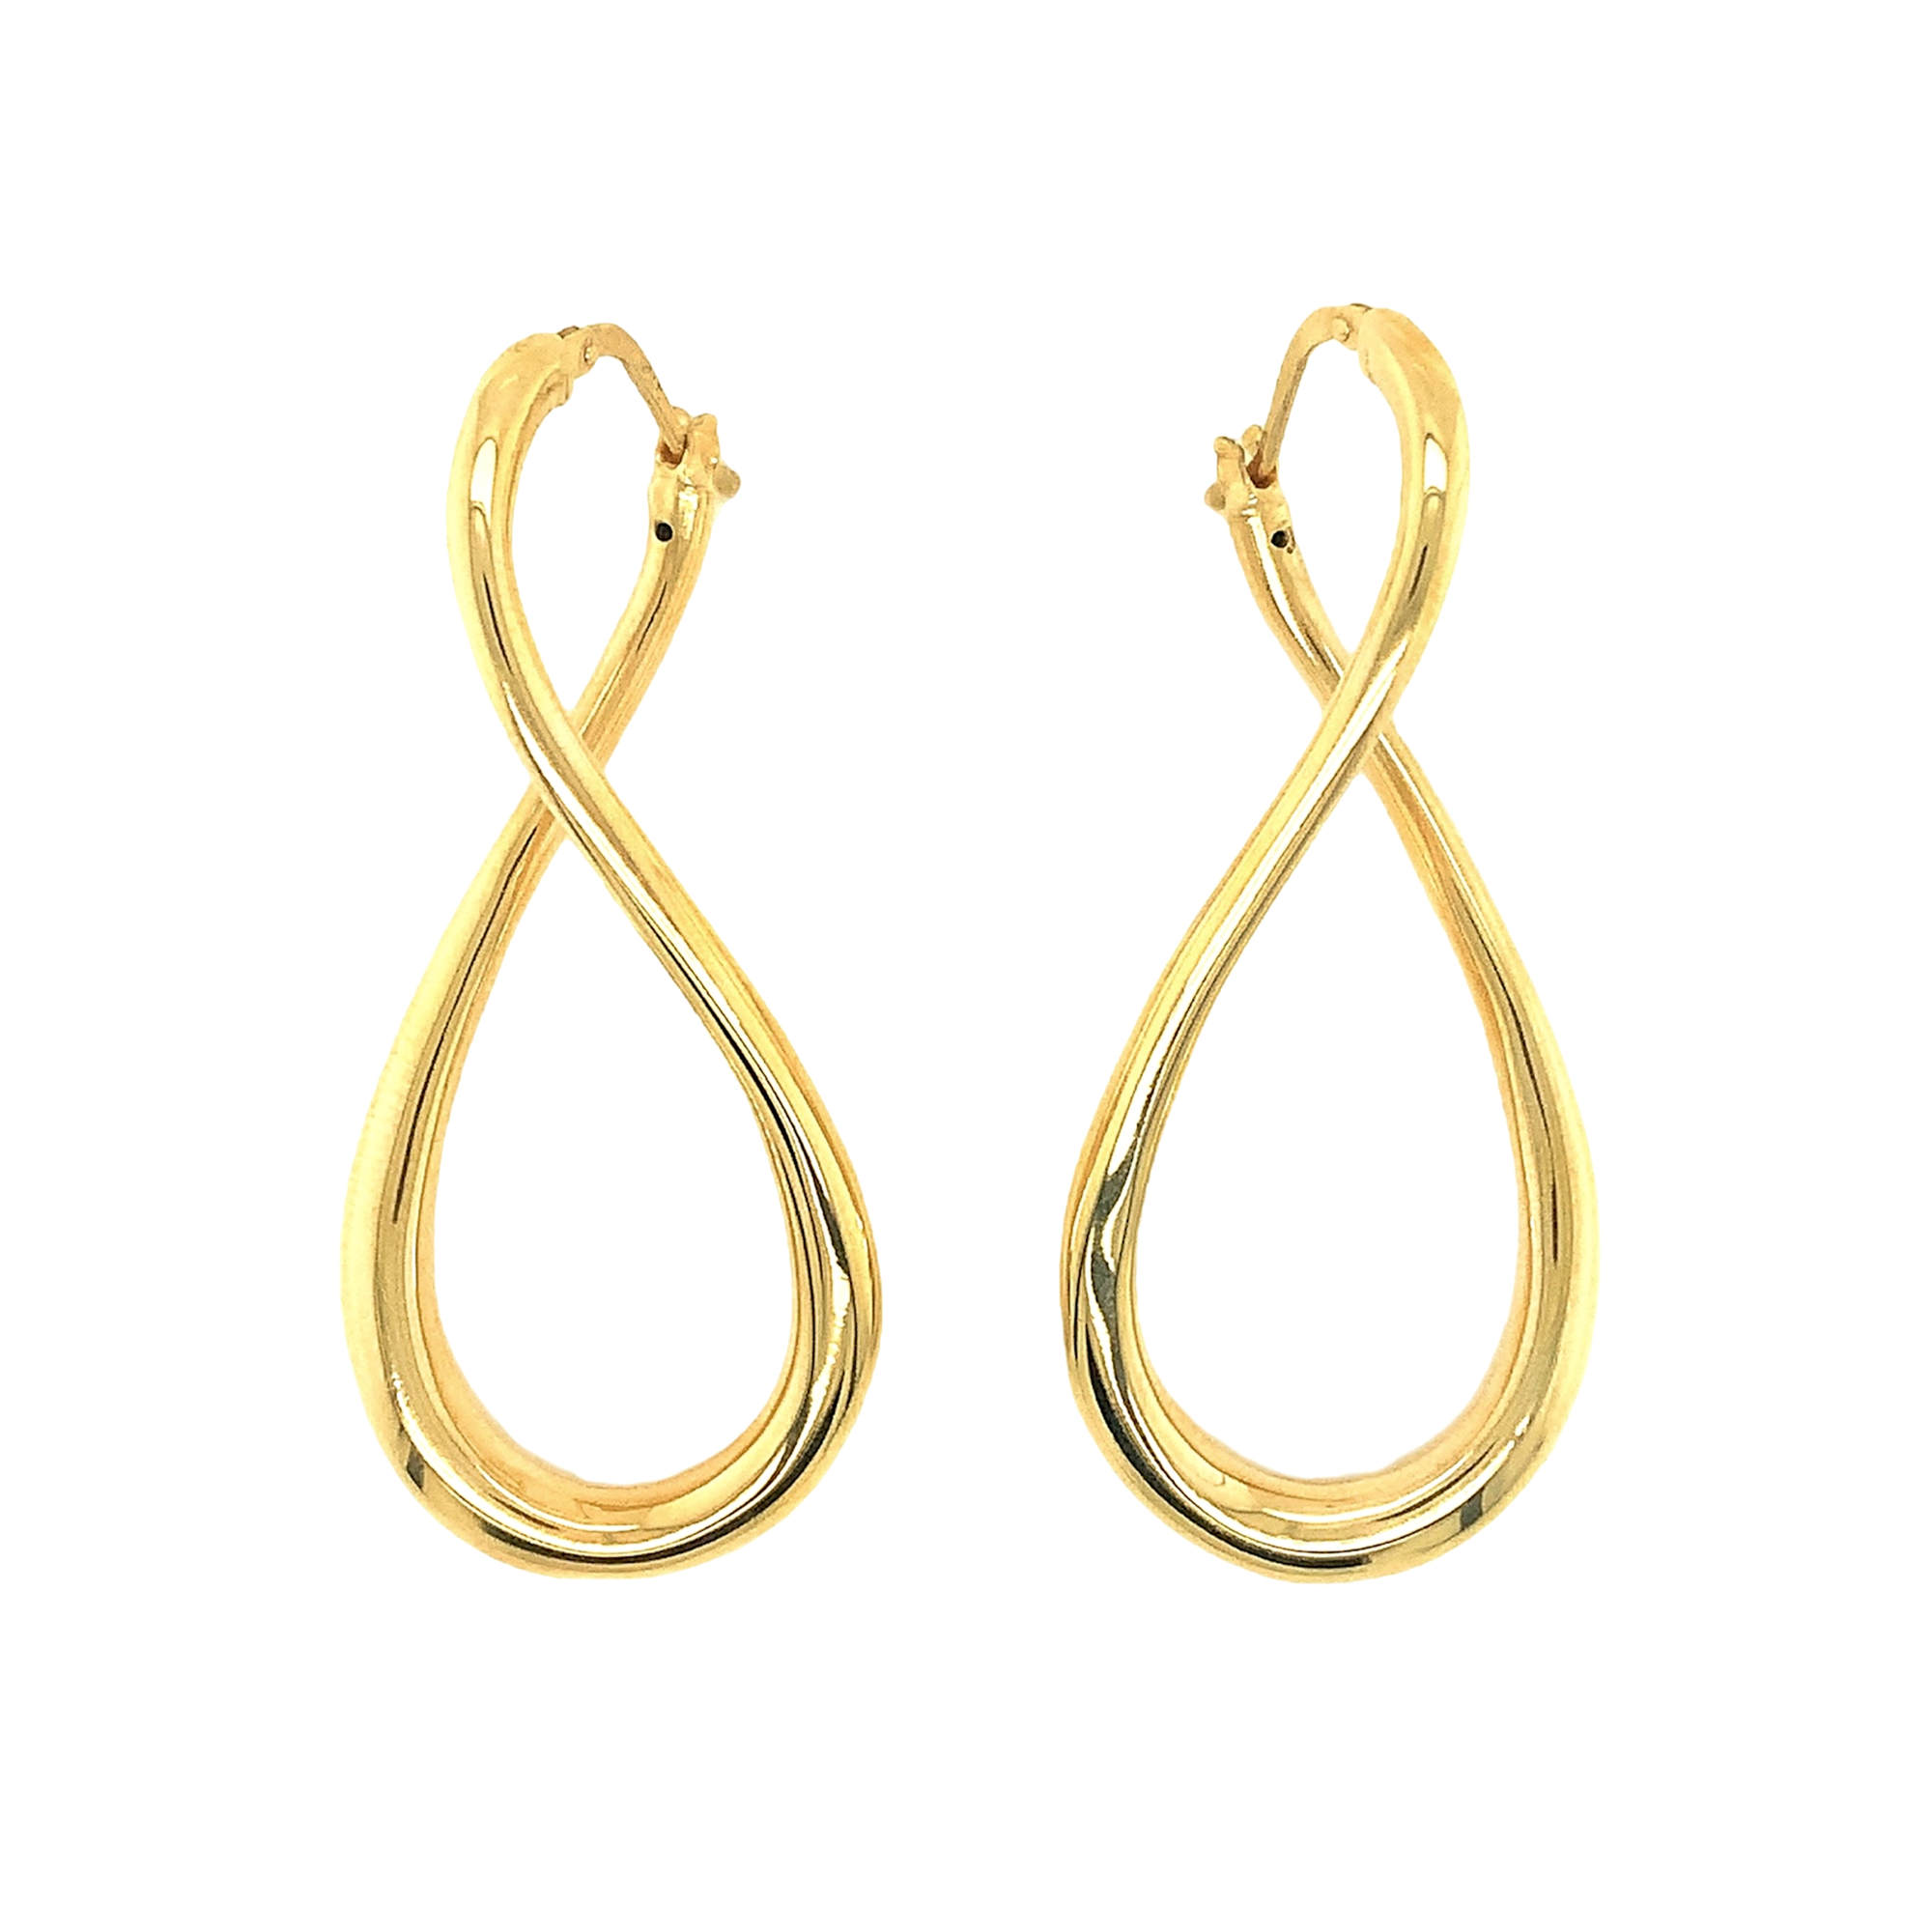 18k Yellow Gold Curved Drop Earrings by Lisa Nik available at Talisman Collection Fine Jewelers in El Dorado Hills, CA and online. A timeless wardrobe essential – these classic 18k yellow gold curved drop earrings feature a graceful infinity shape and secure lever closures. Their enduring style and versatility make them a must-have accessory for every jewelry wardrobe.